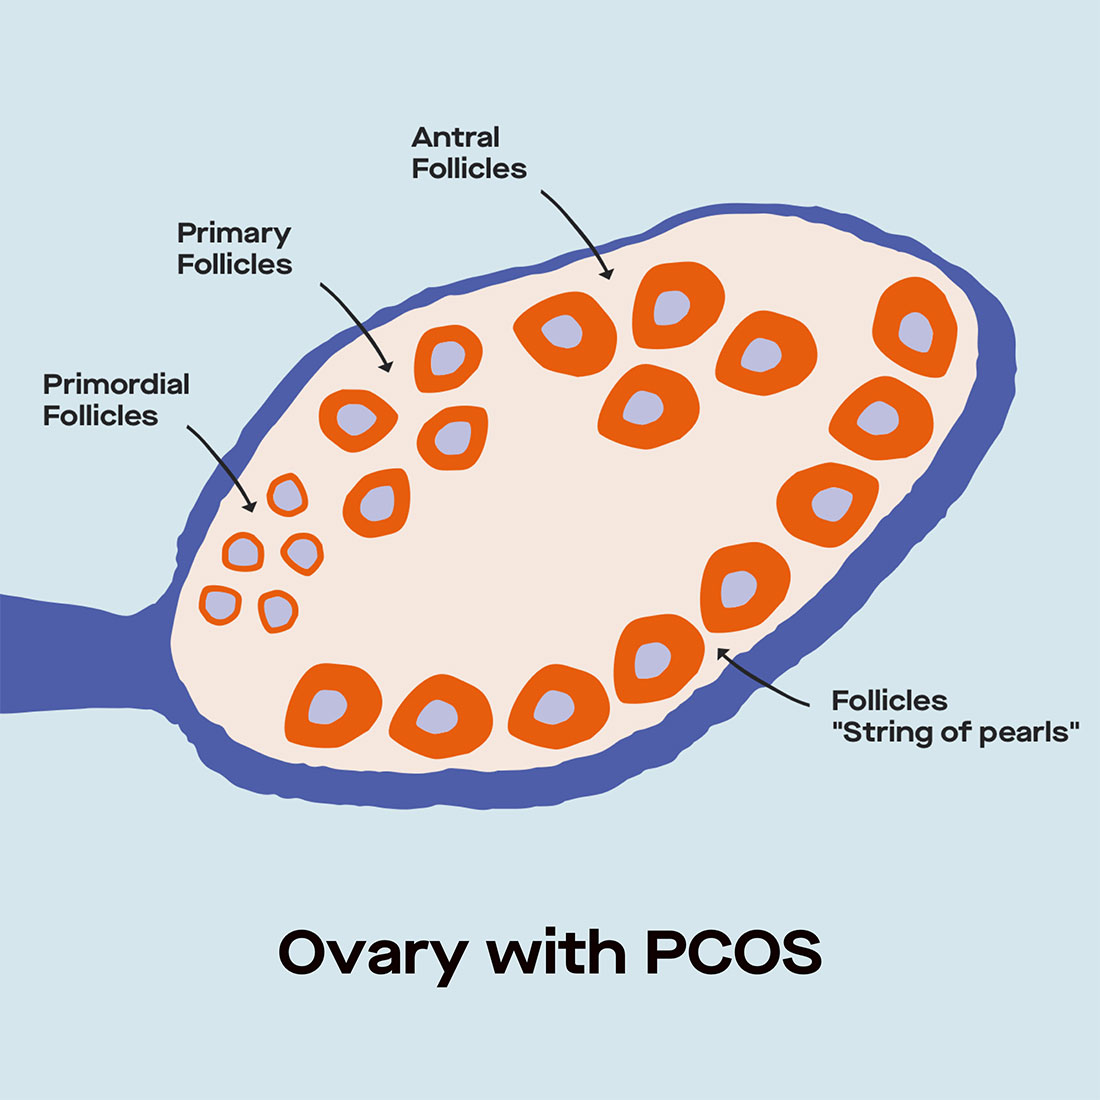 What are Some Common PCOS Tests Recommended for Diagnosis?